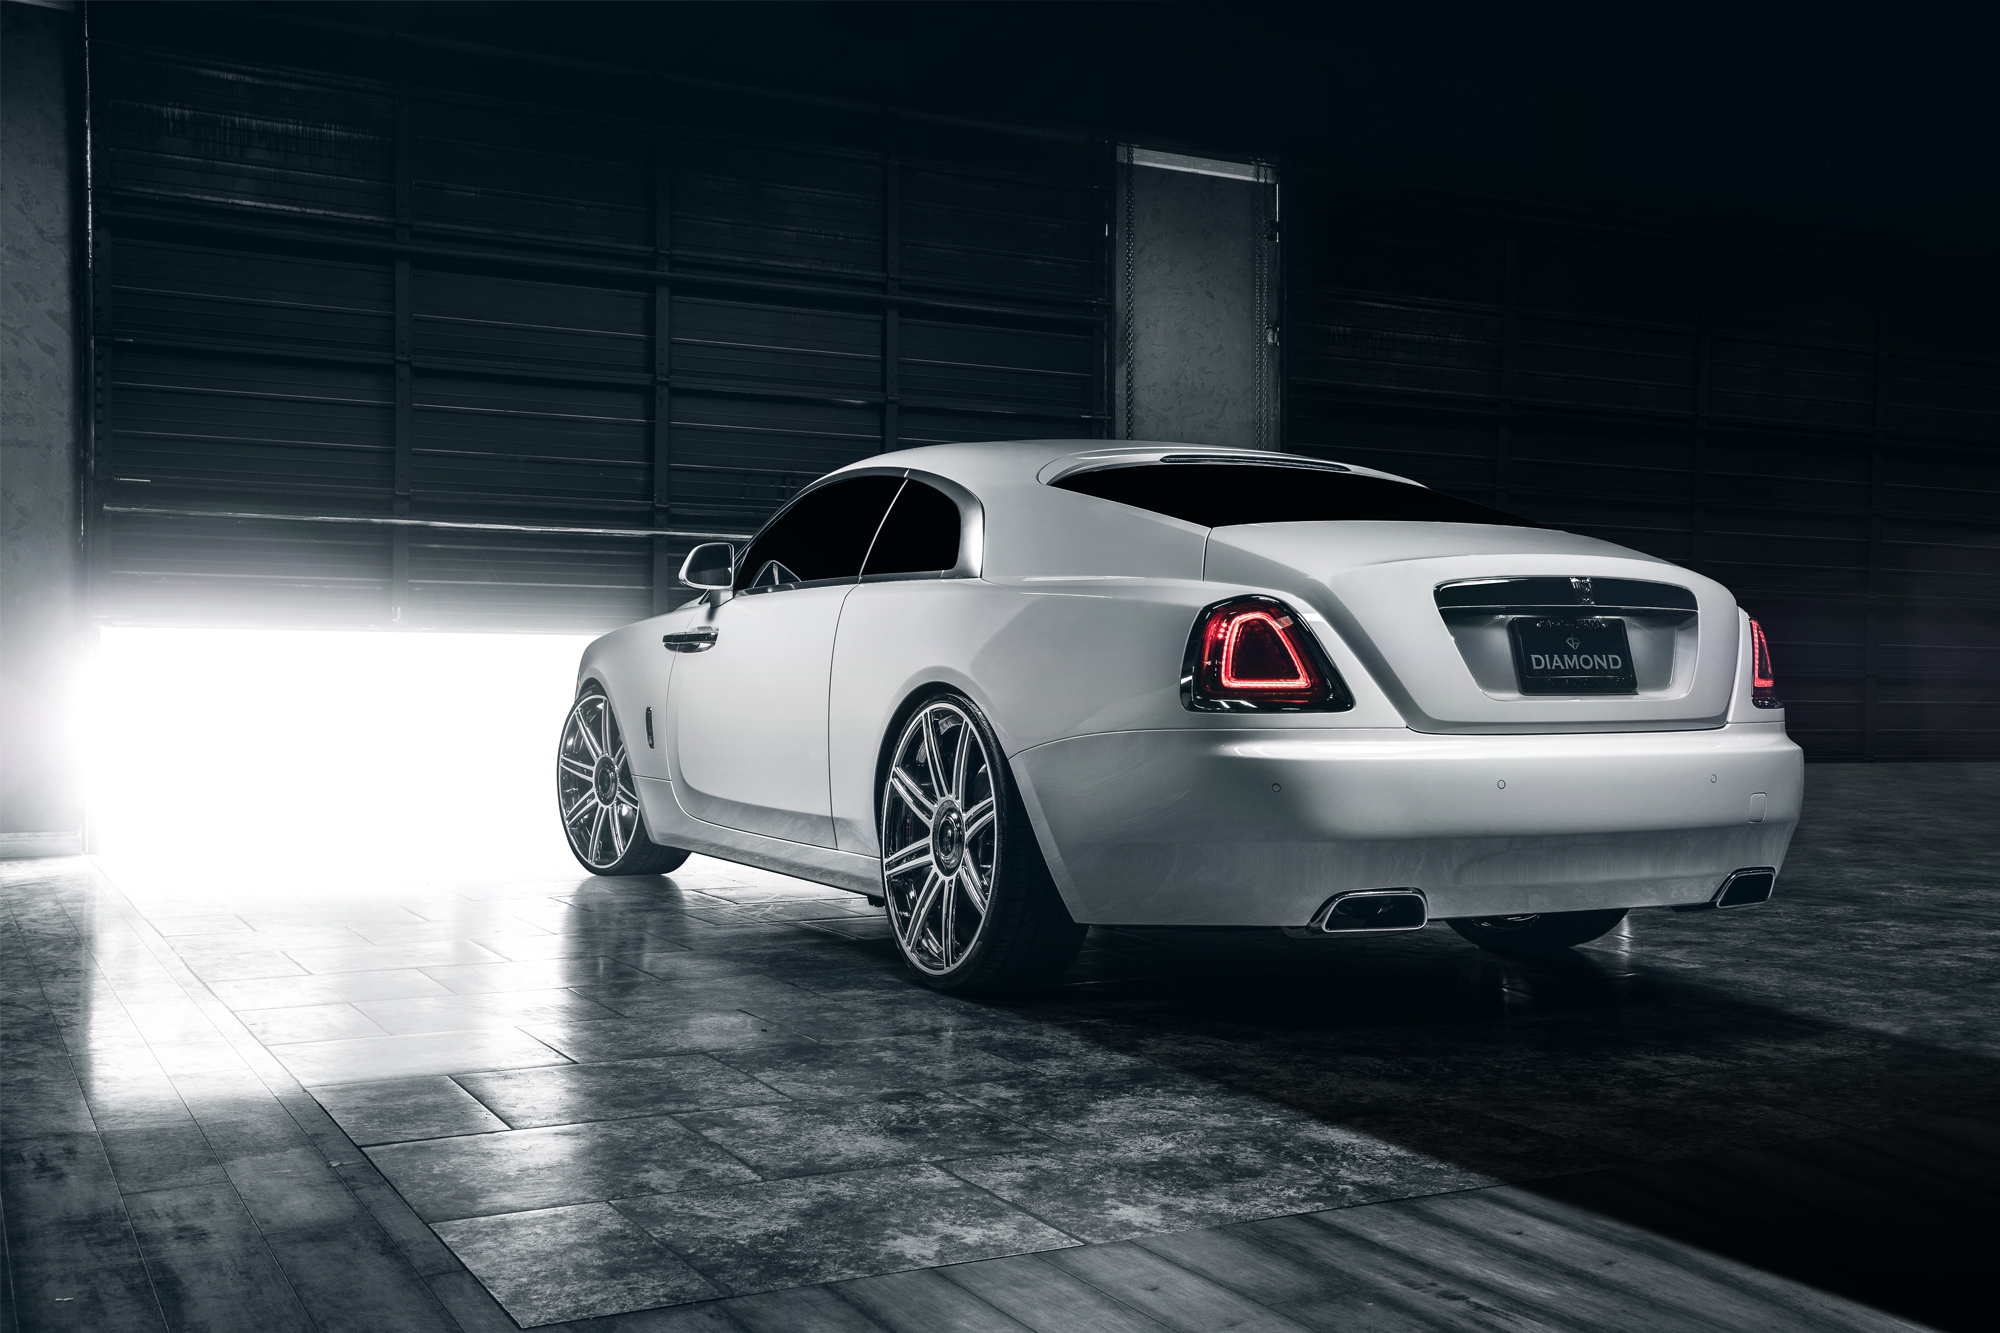 rolls-royce, cars, white, back view, rear view, wraith